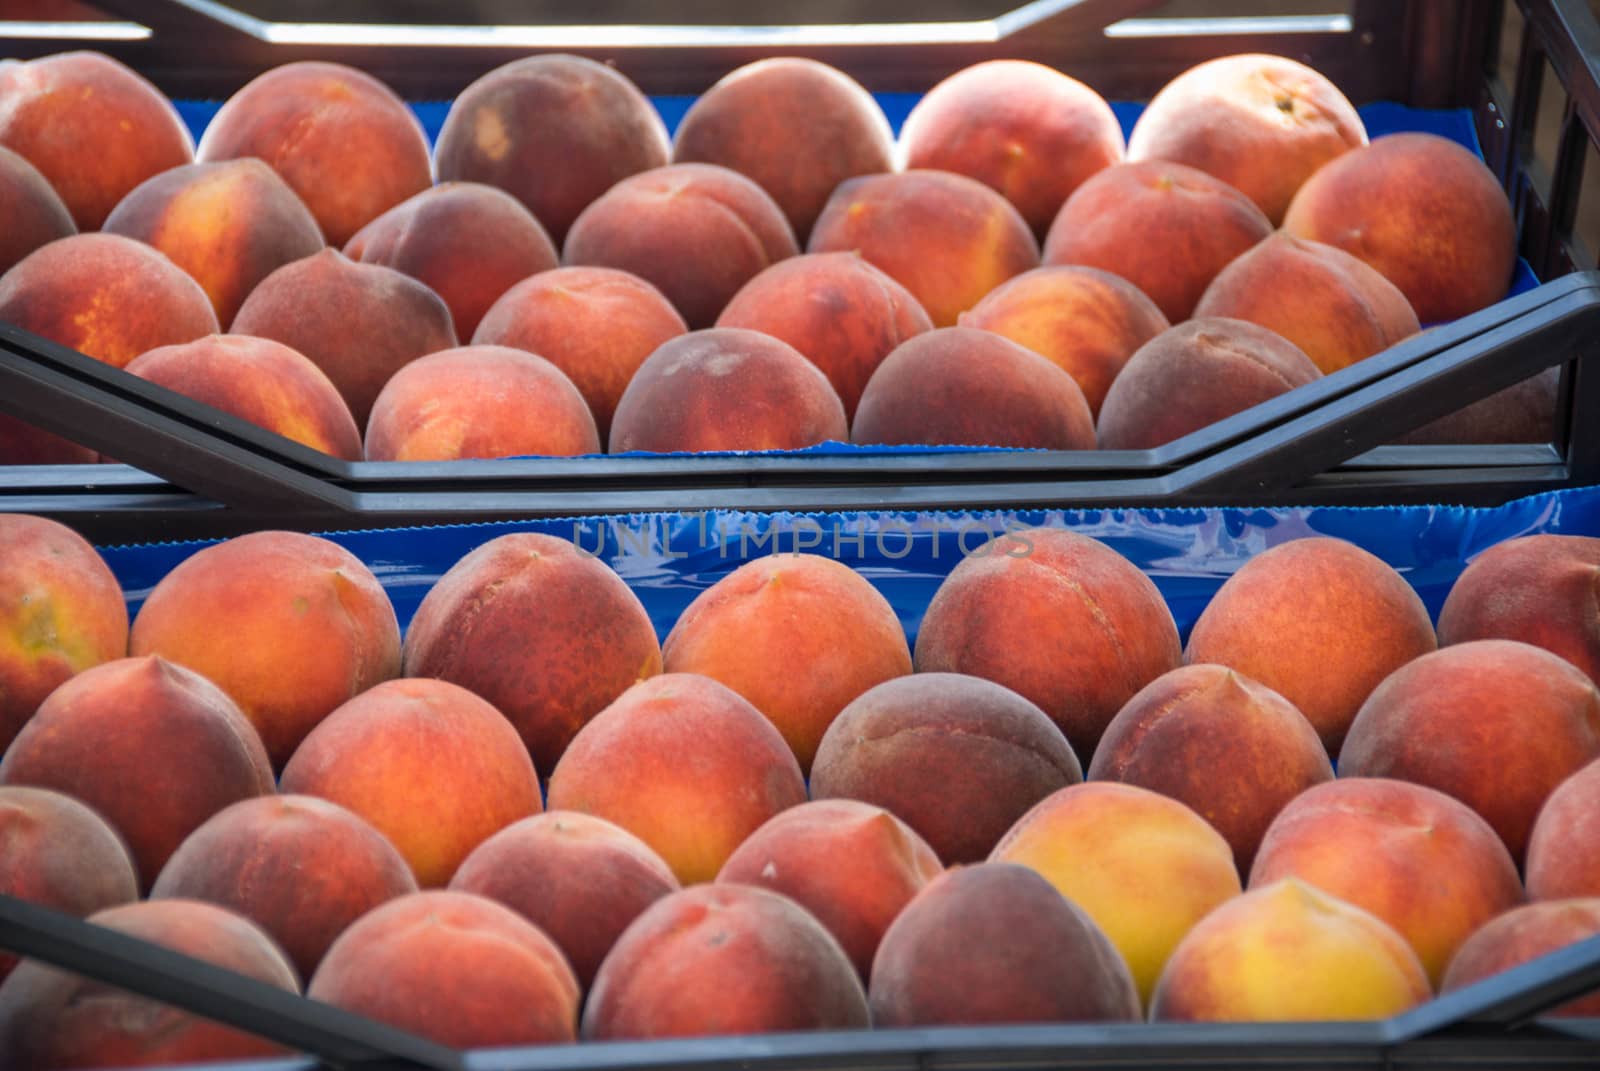 Peaches in a basket at the market by cosca